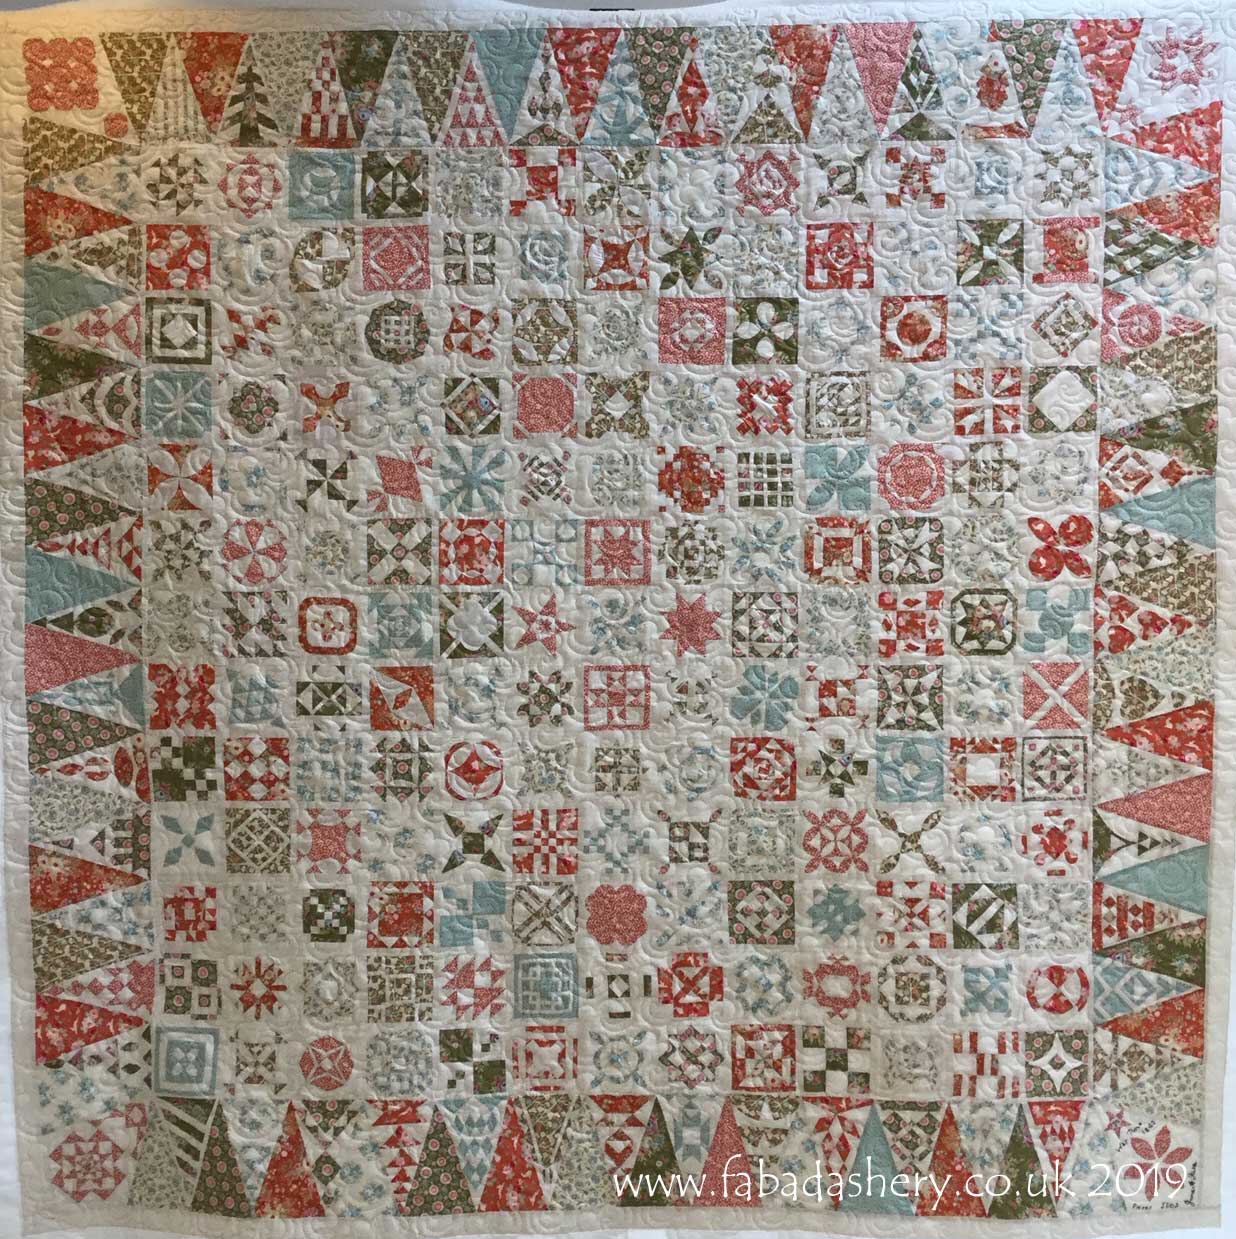 Fabadashery Longarm Quilting: Advent Day 7 - Dear Jane Quilt made by Sheila